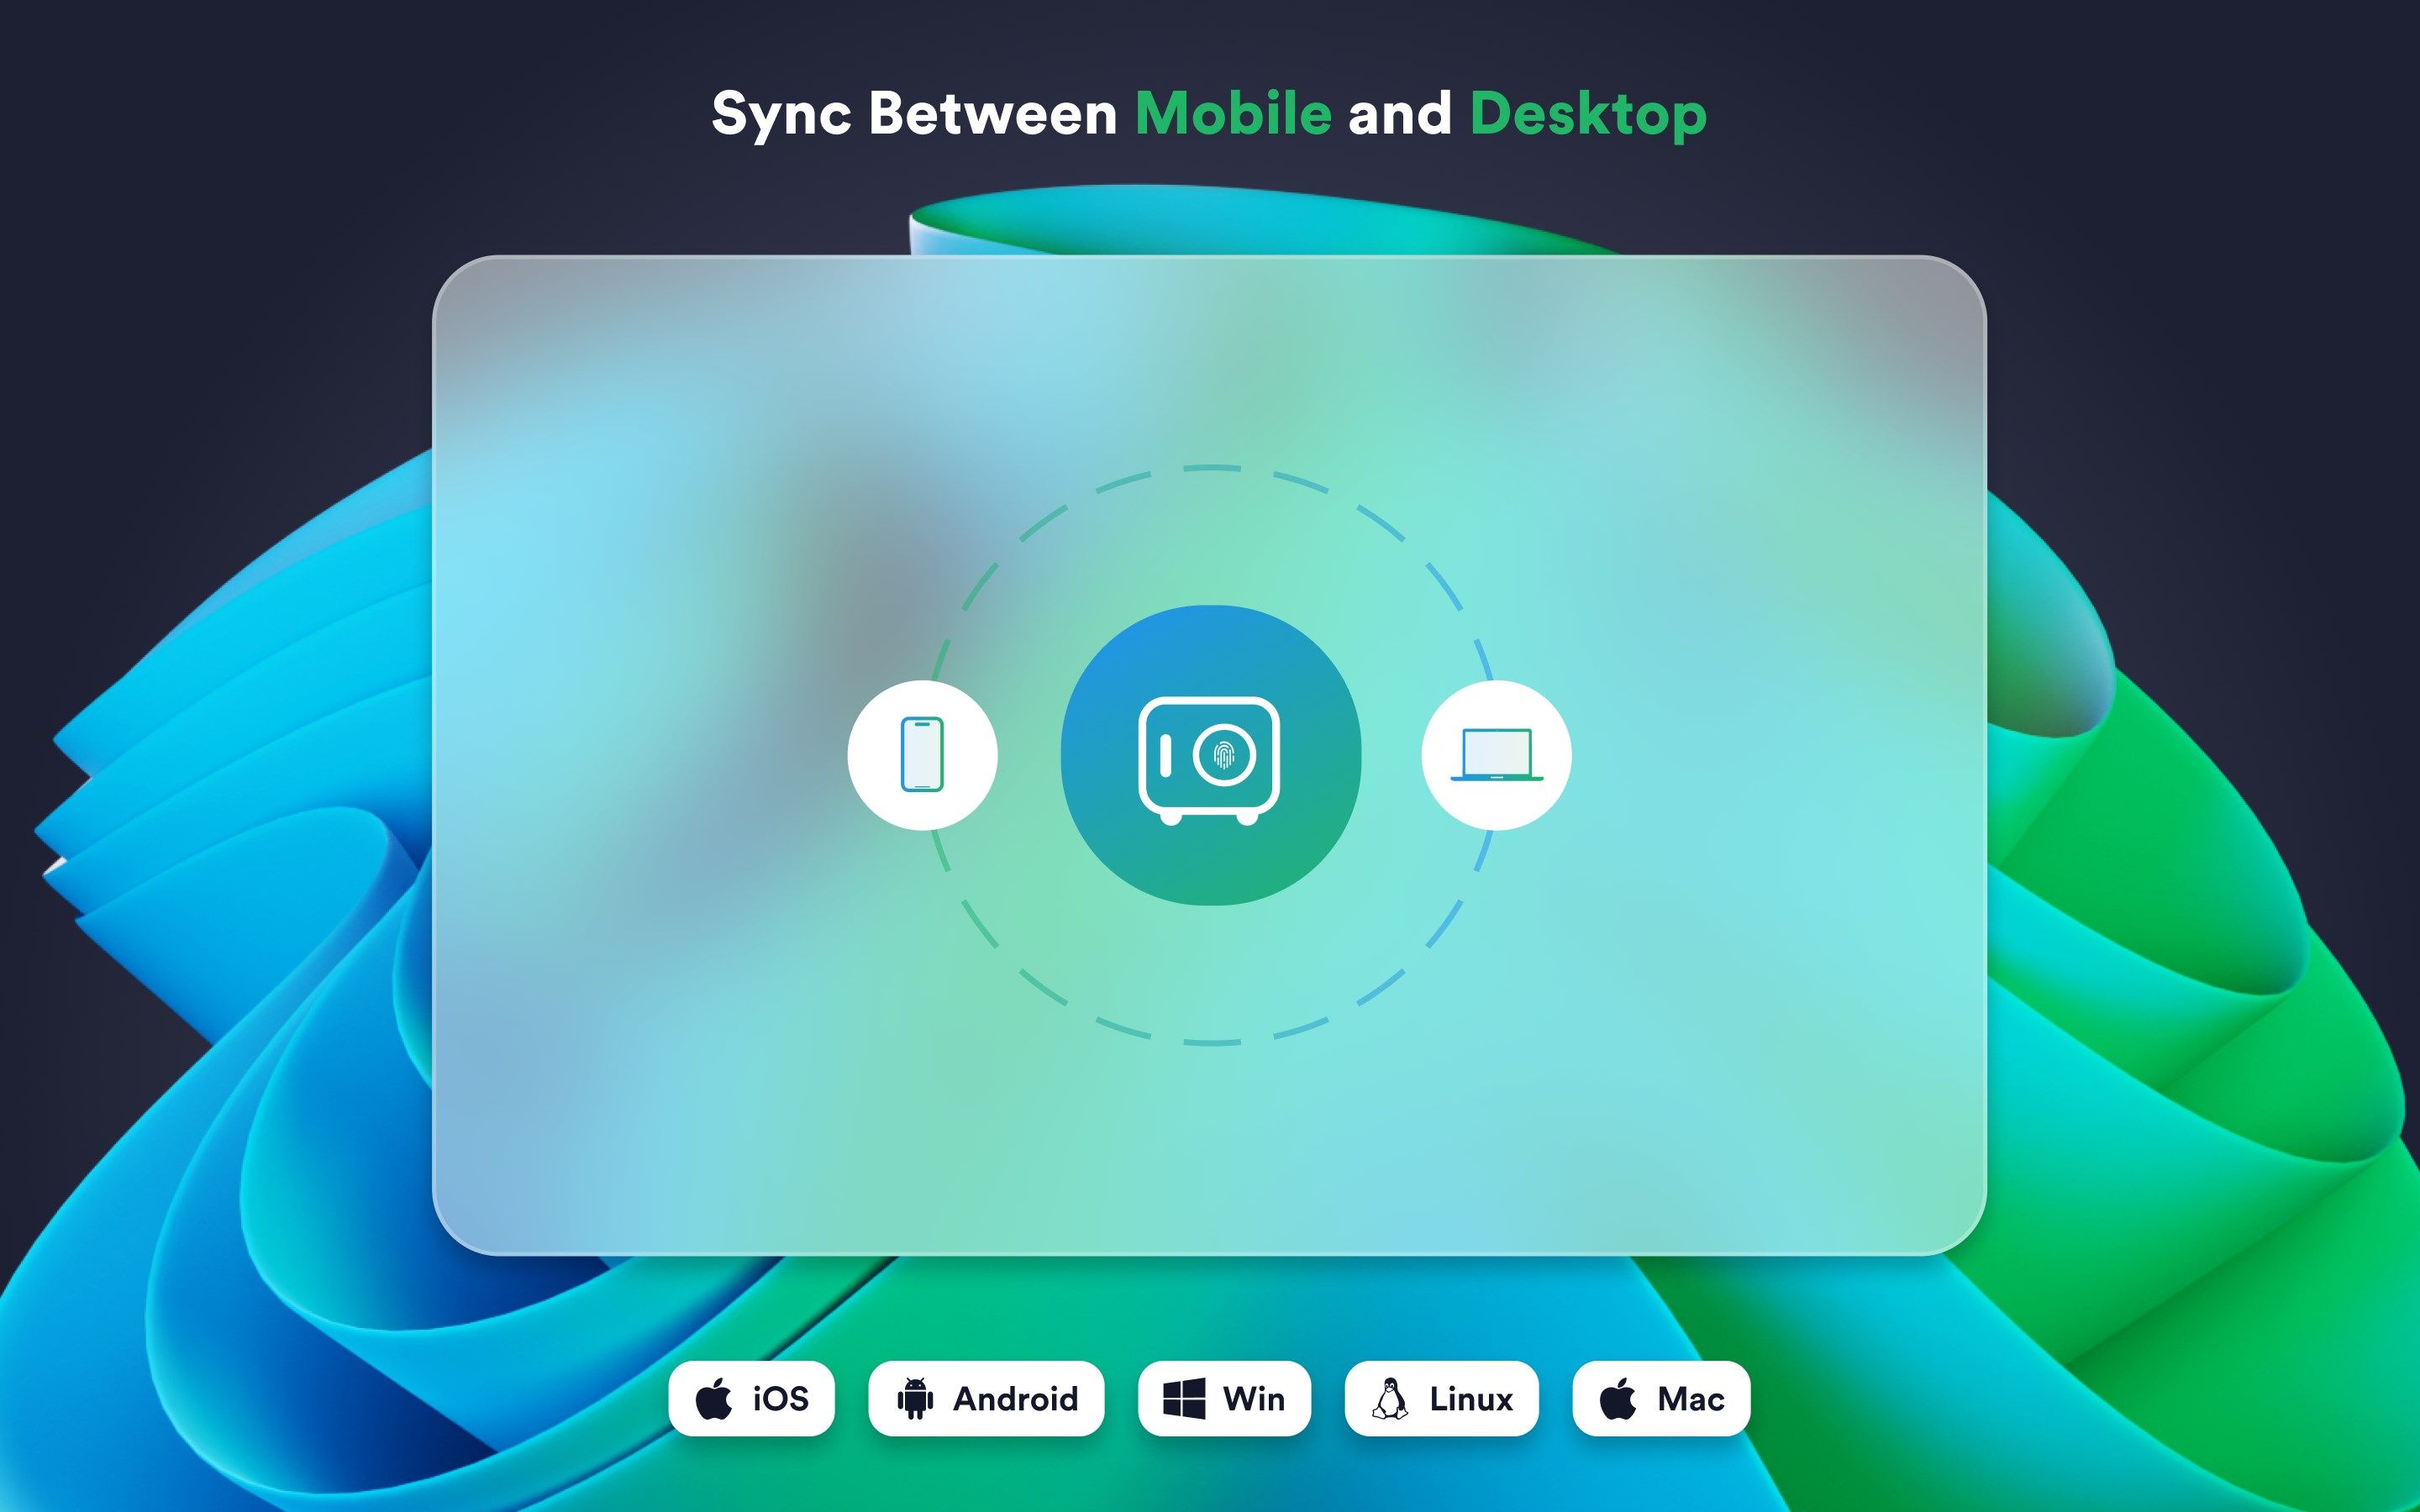 Sync Between Mobile and Desktop